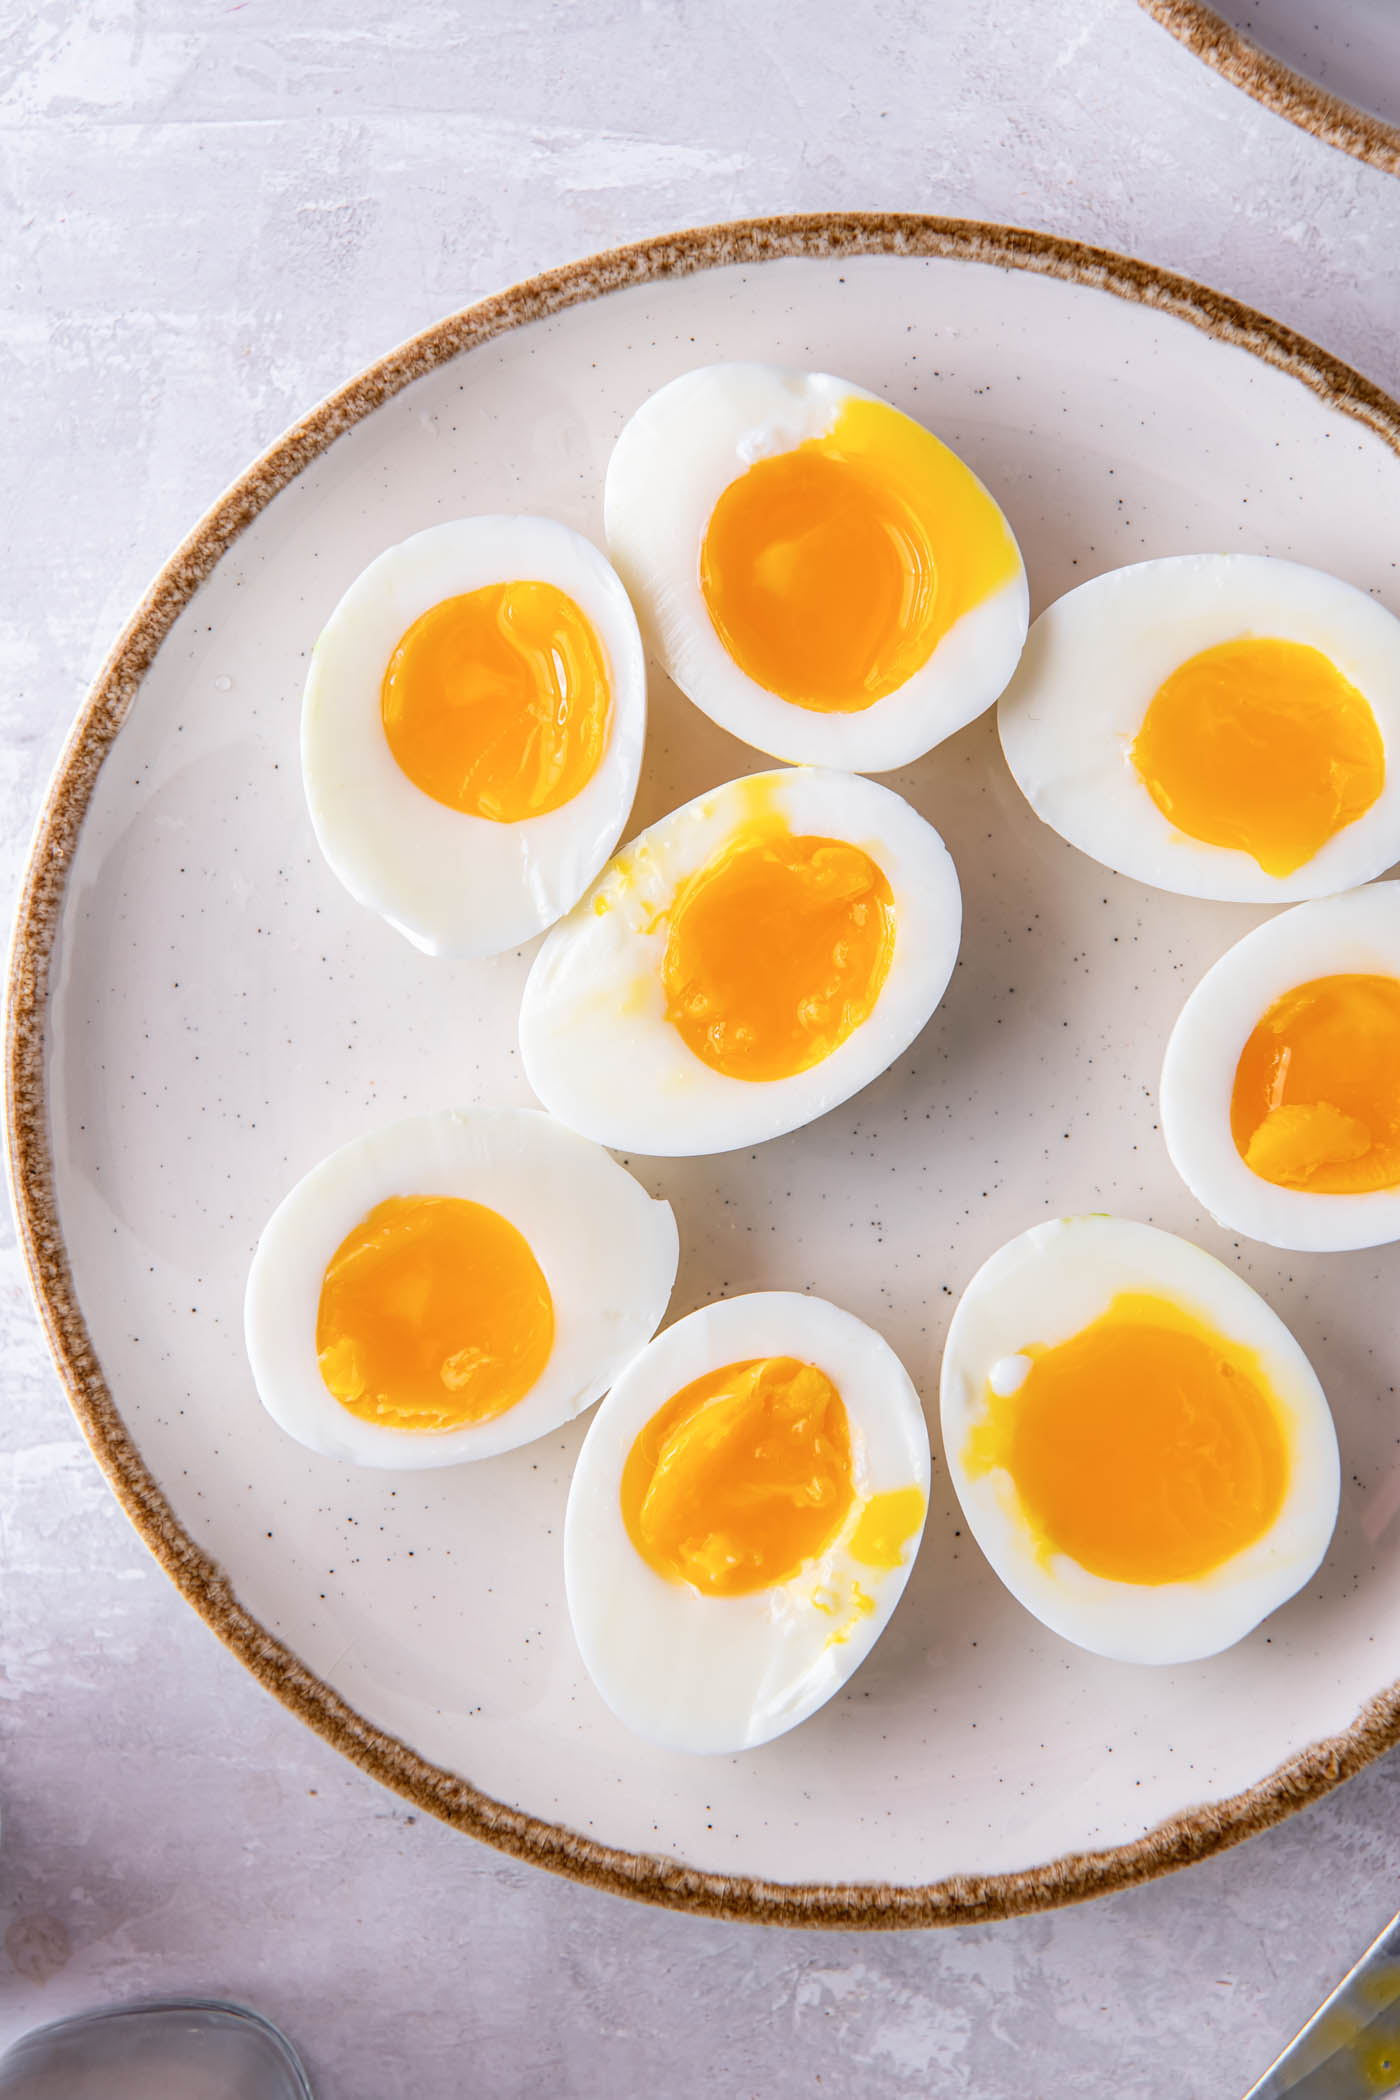 Soft boiled eggs cut in half on a plate.